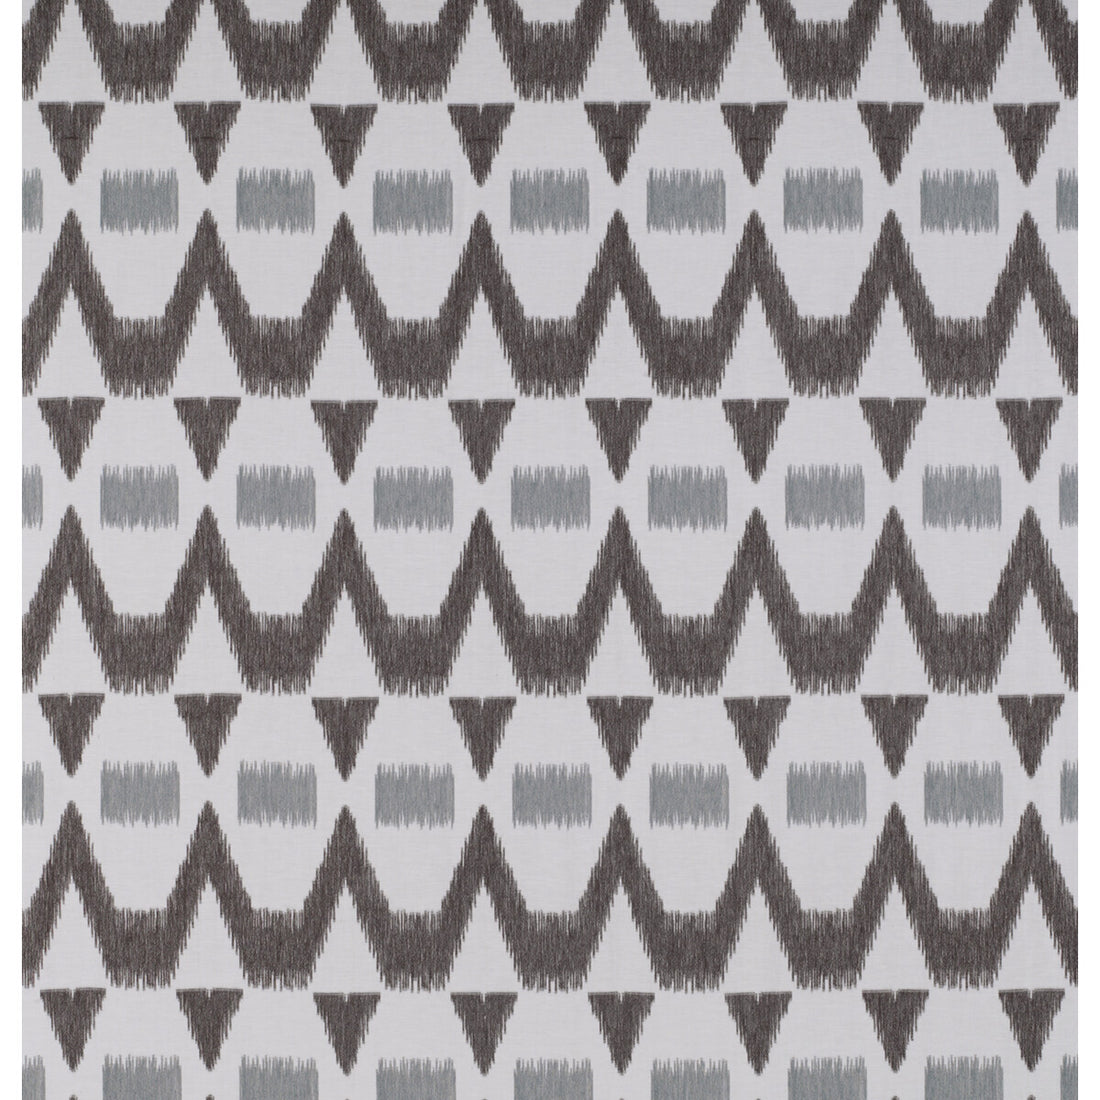 Montecristo fabric in gris/chocolate color - pattern GDT5317.001.0 - by Gaston y Daniela in the Tierras collection